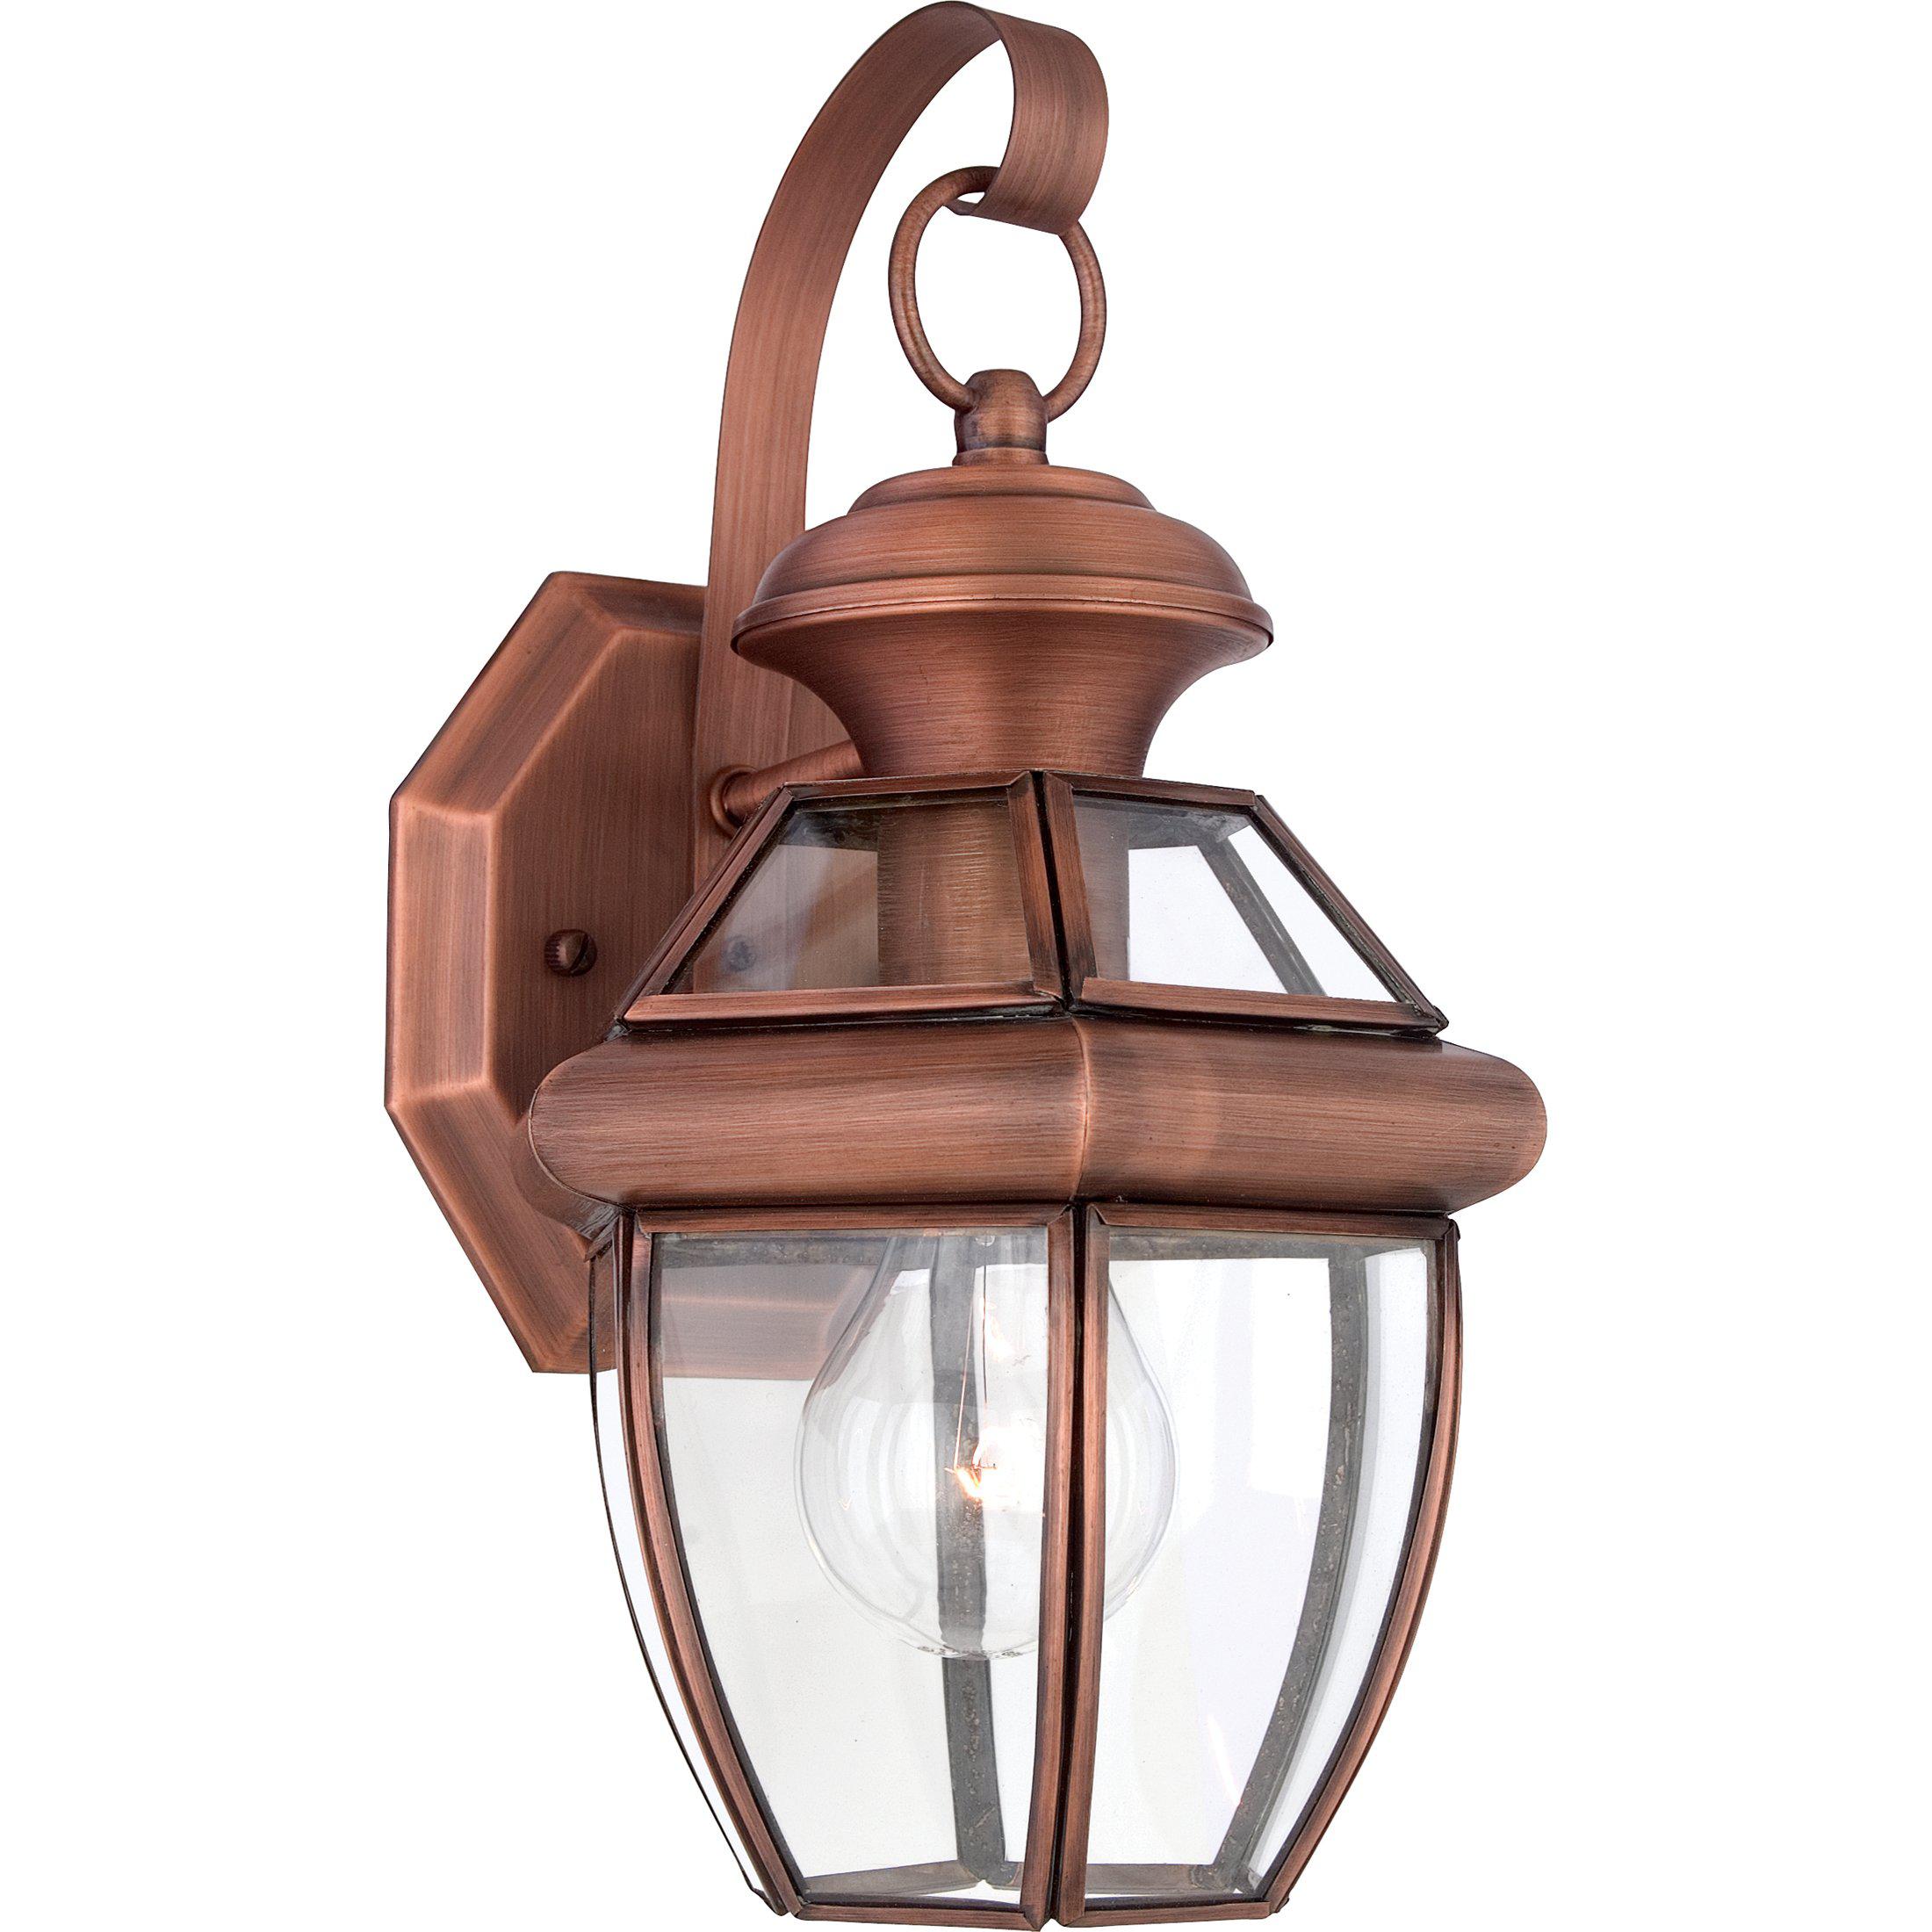 Quoizel  Newbury Outdoor Lantern, Small Outdoor l Wall Quoizel Aged Copper  